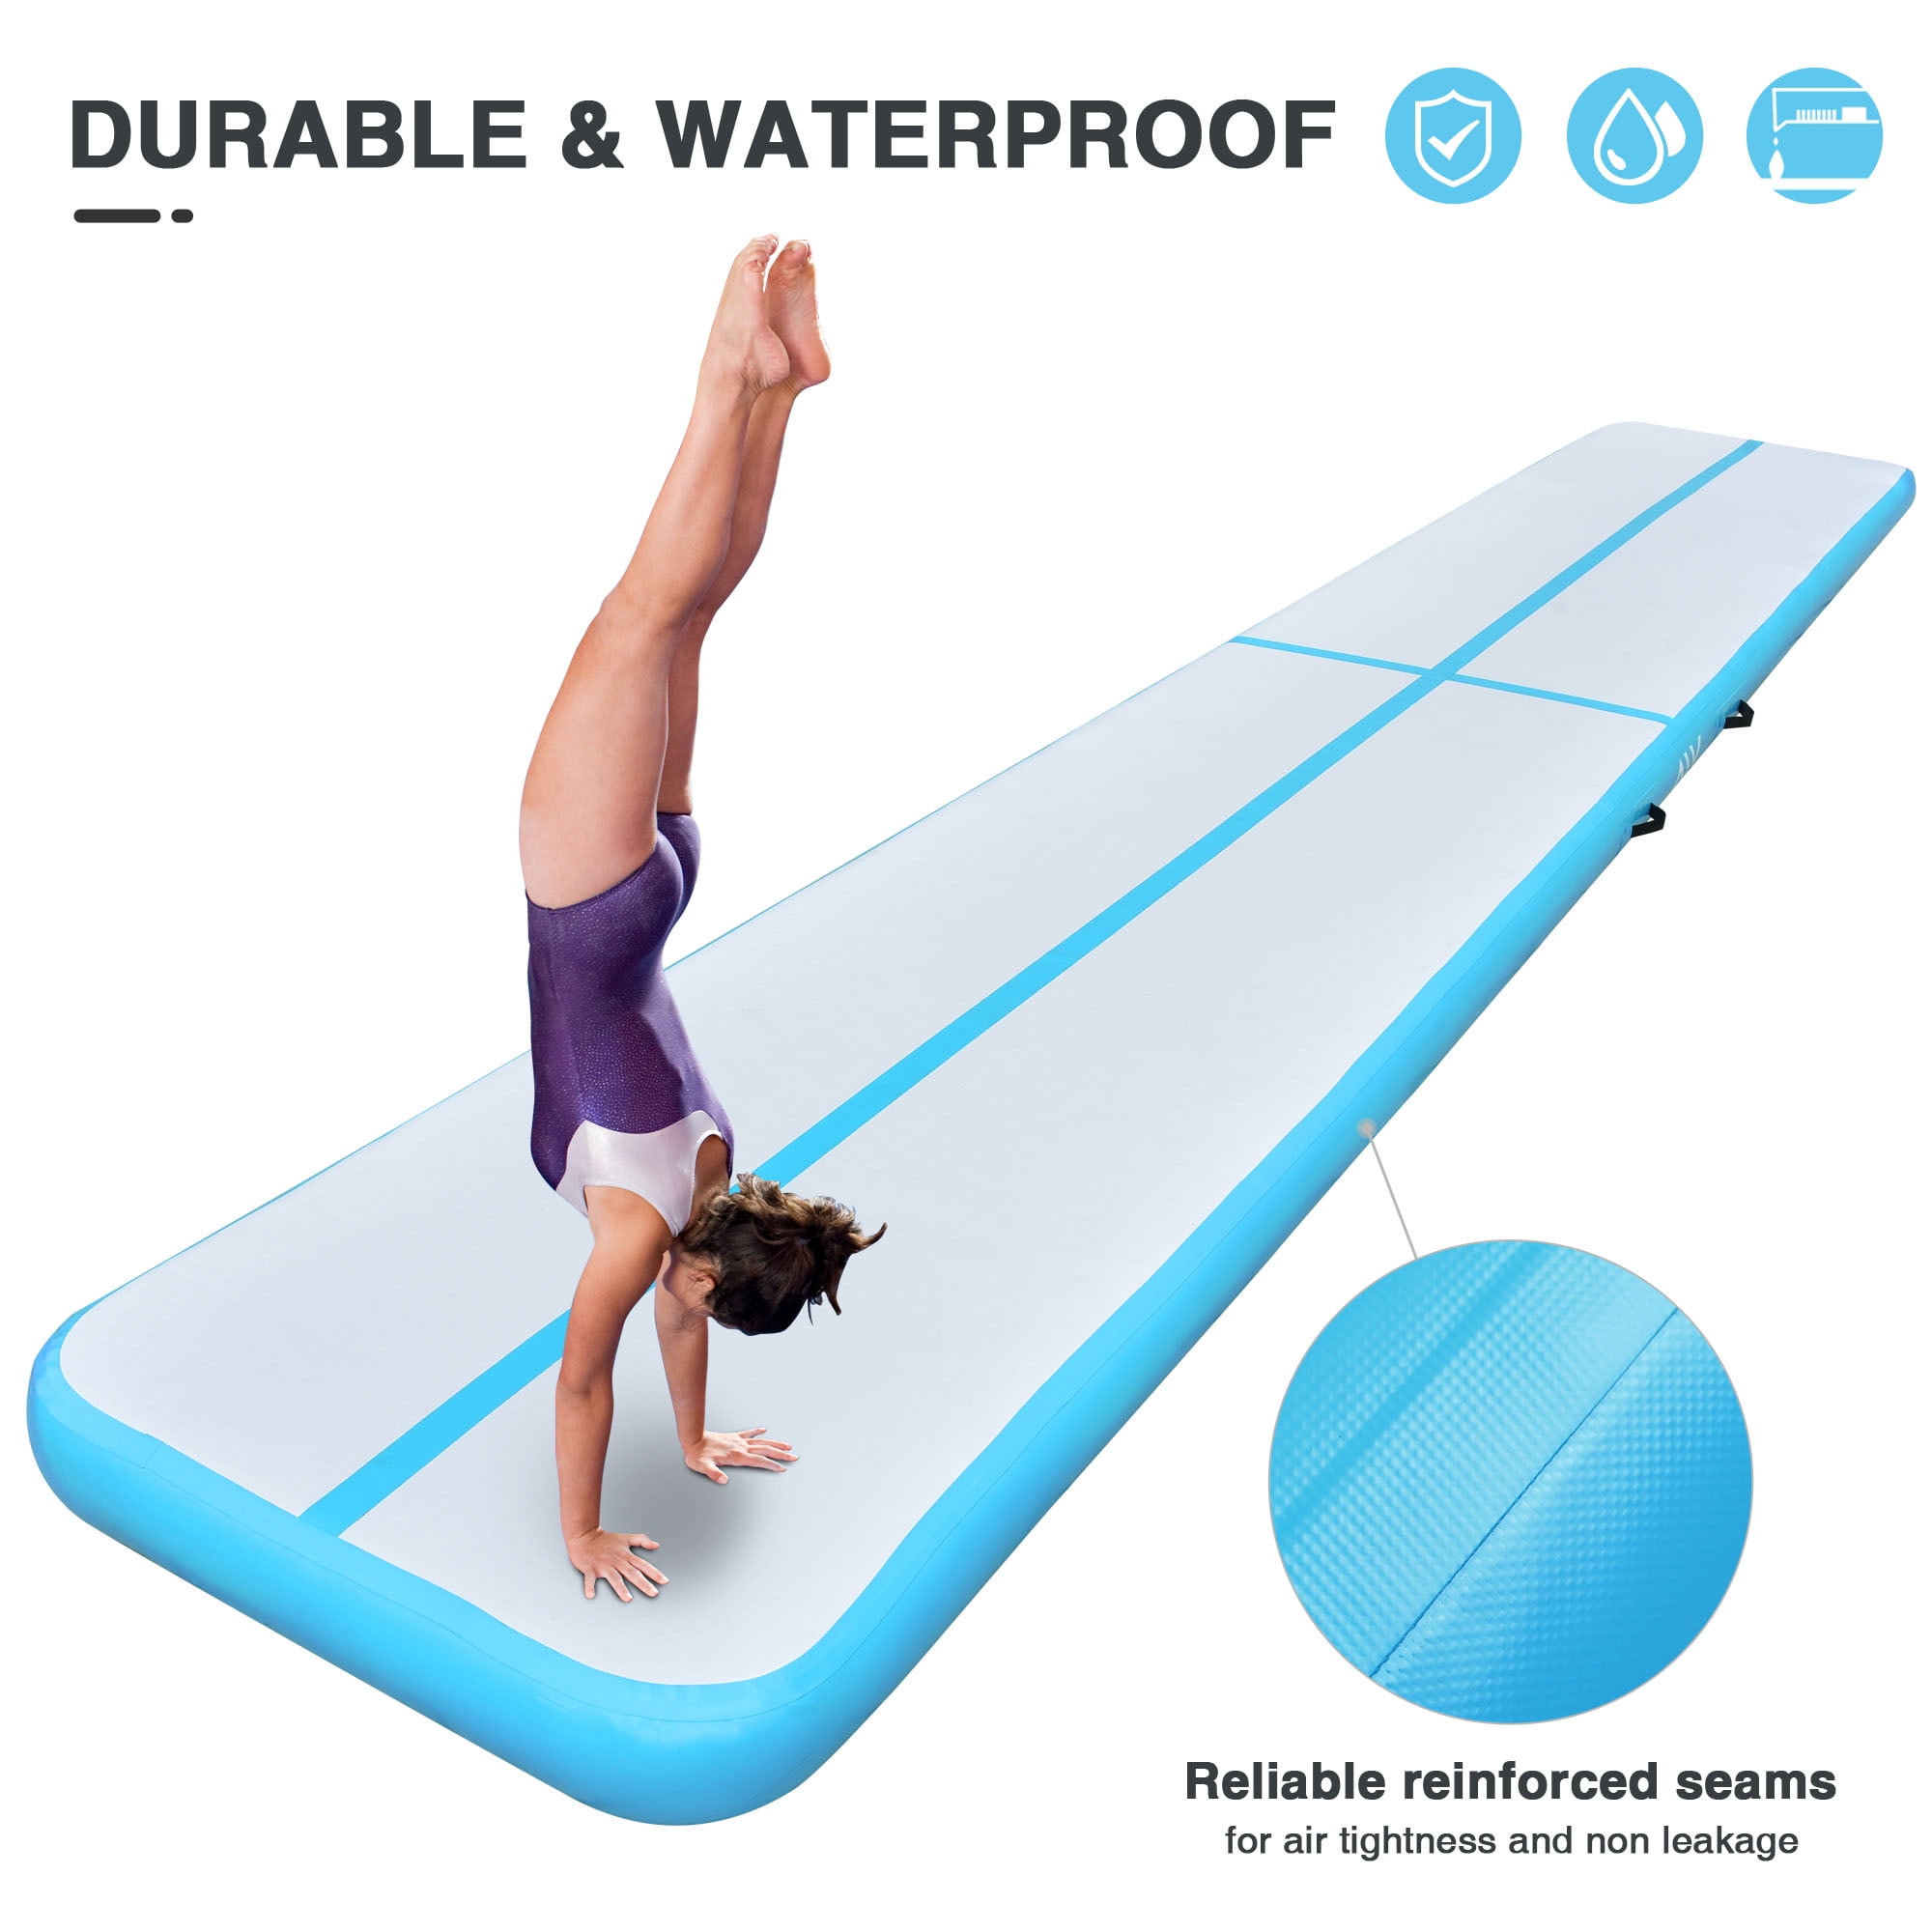  Gymnastics Air Mat Tumbling Mat 13ft/16ft/20ft Tumble Track,  Inflatable Tumbling Mat 4/8 inch Thickness Gymnastics Air Training Mats  with Electric Air Pump for Home Use/Tumbing Meditation/Cheerleading/Water  Use : Sports 